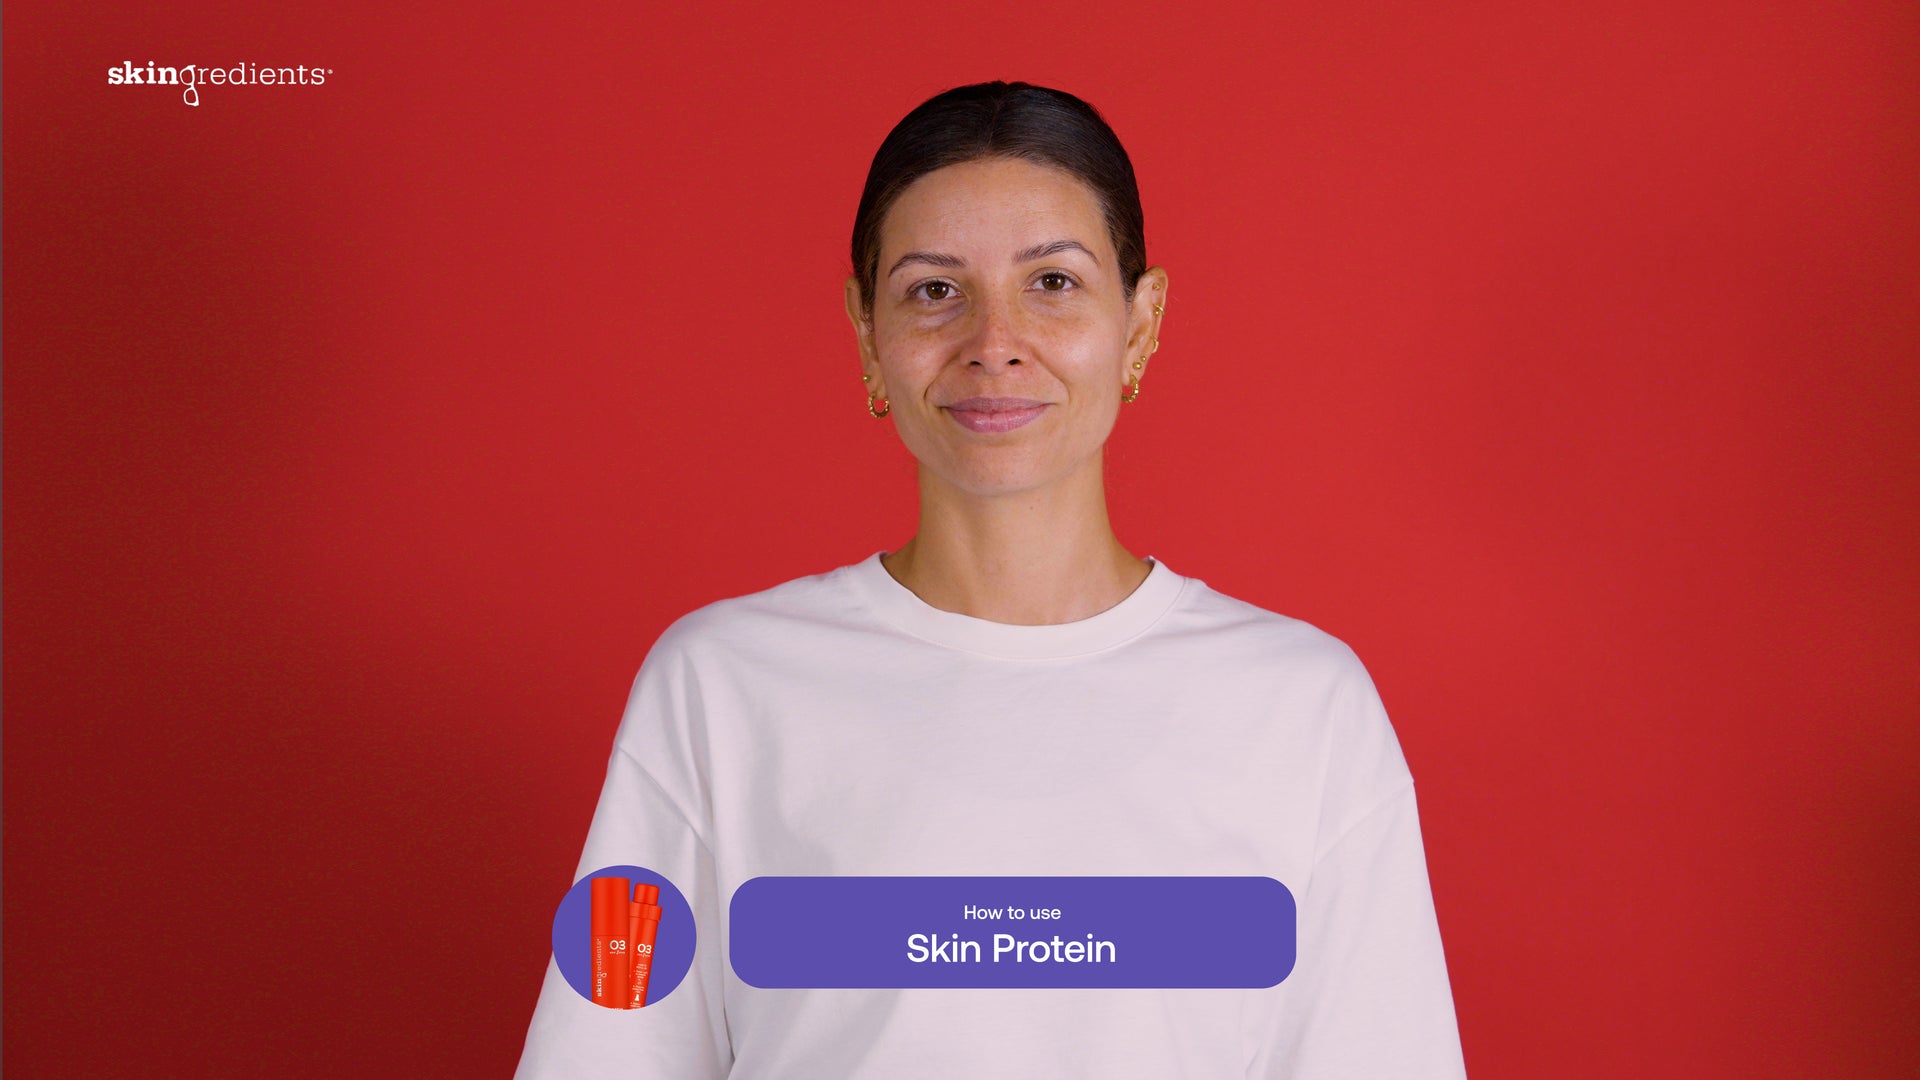 Load video: &lt;p&gt;Meet your ultimate Skin Protein Anti-Ageing Retinoid Serum Starter Kit containing your pack for life (Primary!) + your first value-saving refill pack.&lt;/p&gt;
&lt;p&gt;&lt;strong&gt; This bundle includes:&lt;/strong&gt; &lt;/p&gt;
&lt;p&gt;&lt;strong&gt;Skingredients® Skin Protein Anti-Ageing Retinoid Serum (45ml) Primary + Refill&lt;/strong&gt;. It is your skincare gamechanger – a lightweight, anti-ageing vitamin A, C + E serum. Like a genie (in a red bottle), Skin Protein grants 3 wishes: tighter, brighter + smoother skin. It’s a creamy, hydrating serum to be slathered on your face, eyes, neck + chest! Protein gives your body the strength it needs, and Skin Protein’s rock star ingredient, retinyl palmitate (read: the fatty form of vitamin A that’s much gentler on the skin), works to maintain strong + healthy skin. Retinyl palmitate, accompanied by beta carotene (a precursor to vitamin A), promises to speed up cell renewal + re-educate the skin for regeneration station. Our Skin Protein also contains a pro-collagen peptide to plump fine lines + wrinkles, vitamins C + E, which are powerful antioxidants that help to neutralise the ageing effects of free radical activity, and skin-soothing rooibos tea + green tea extract for added antioxidant goodness – because you can never have enough! &lt;br&gt; Skin Protein is the 03® step in our KeyFour product range. Use it in the AM + PM to tackle a line-up of skin concerns, including dullness, lines and wrinkles, lax skin, dark circles, blackheads, whiteheads, lumps, bumps, large pores and excessive oiliness. Vitamin A is a skincare hero to guarantee visible results. It’s progressive enough for daily use, yet effective so you can quickly achieve noticeable results. &lt;br&gt; Nerdie Note: Make sure you keep your primary pack (tube-for-life that’s made from resilient, ultra-durable materials!) and continue to replenish with our value-saving planet-friendly refill tubes.&lt;/p&gt;
&lt;p&gt;&lt;strong&gt;FREE COMplimentary Cleanse Off Mitt:&lt;/strong&gt;&lt;span&gt; The ideal accompaniment to a double cleanse, the Cleanse off Mitt (COM) is a travel-friendly, reusable cleansing companion. An eco-friendly alternative to one-use cotton wool and wipes, it removes all traces of makeup naturally – including stubborn mascara. For an effective pre-cleanse, just add water, gently swipe the mitt across your face and watch as all traces of makeup disappear.&lt;/span&gt;&lt;/p&gt;
&lt;p&gt;&lt;strong&gt;Nerdie Note:&lt;/strong&gt;&lt;span&gt; &lt;/span&gt;Make sure you keep your primary pack (tube-for-life that’s made from resilient, ultra-durable materials!) and continue to replenish with our value-saving planet-friendly refill tubes.&lt;/p&gt;